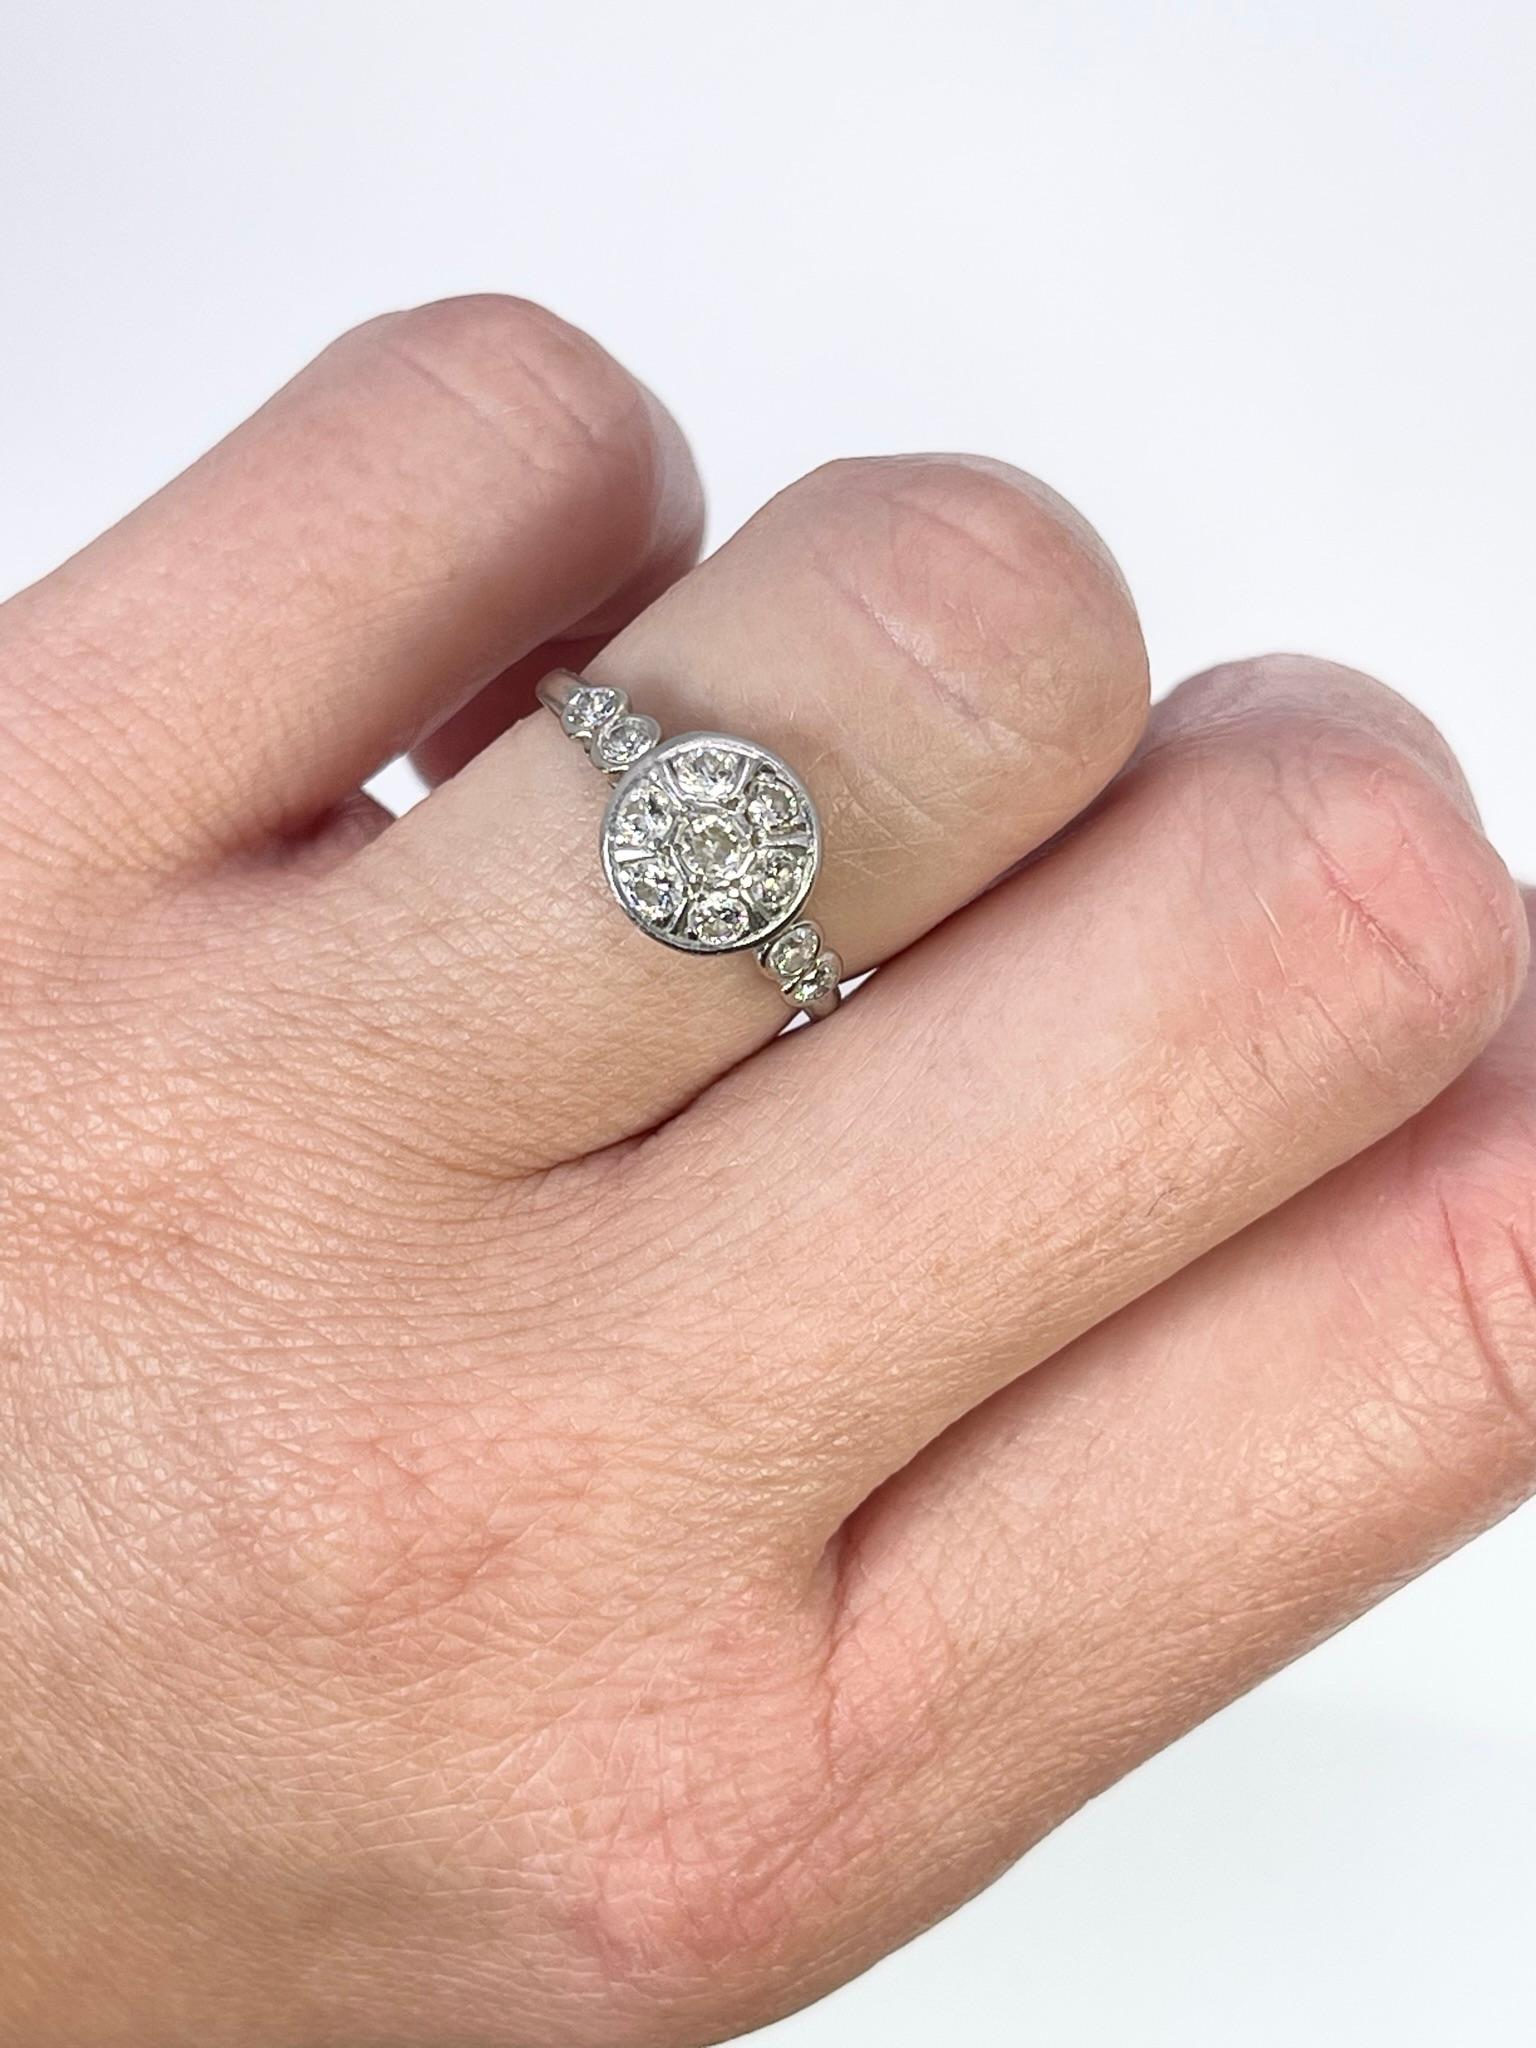 Diamond ring made in 14KT white gold, old and vintage, diamonds are old cut.

GRAM WEIGHT: 2.37gr
METAL: 14KT white gold

NATURAL DIAMOND(S)
Cut: Round(old cut)
Color: G (average)
Clarity: VS (average)
Carat: 0.50ct
Size: 67 (can be re-sized)
Item#: